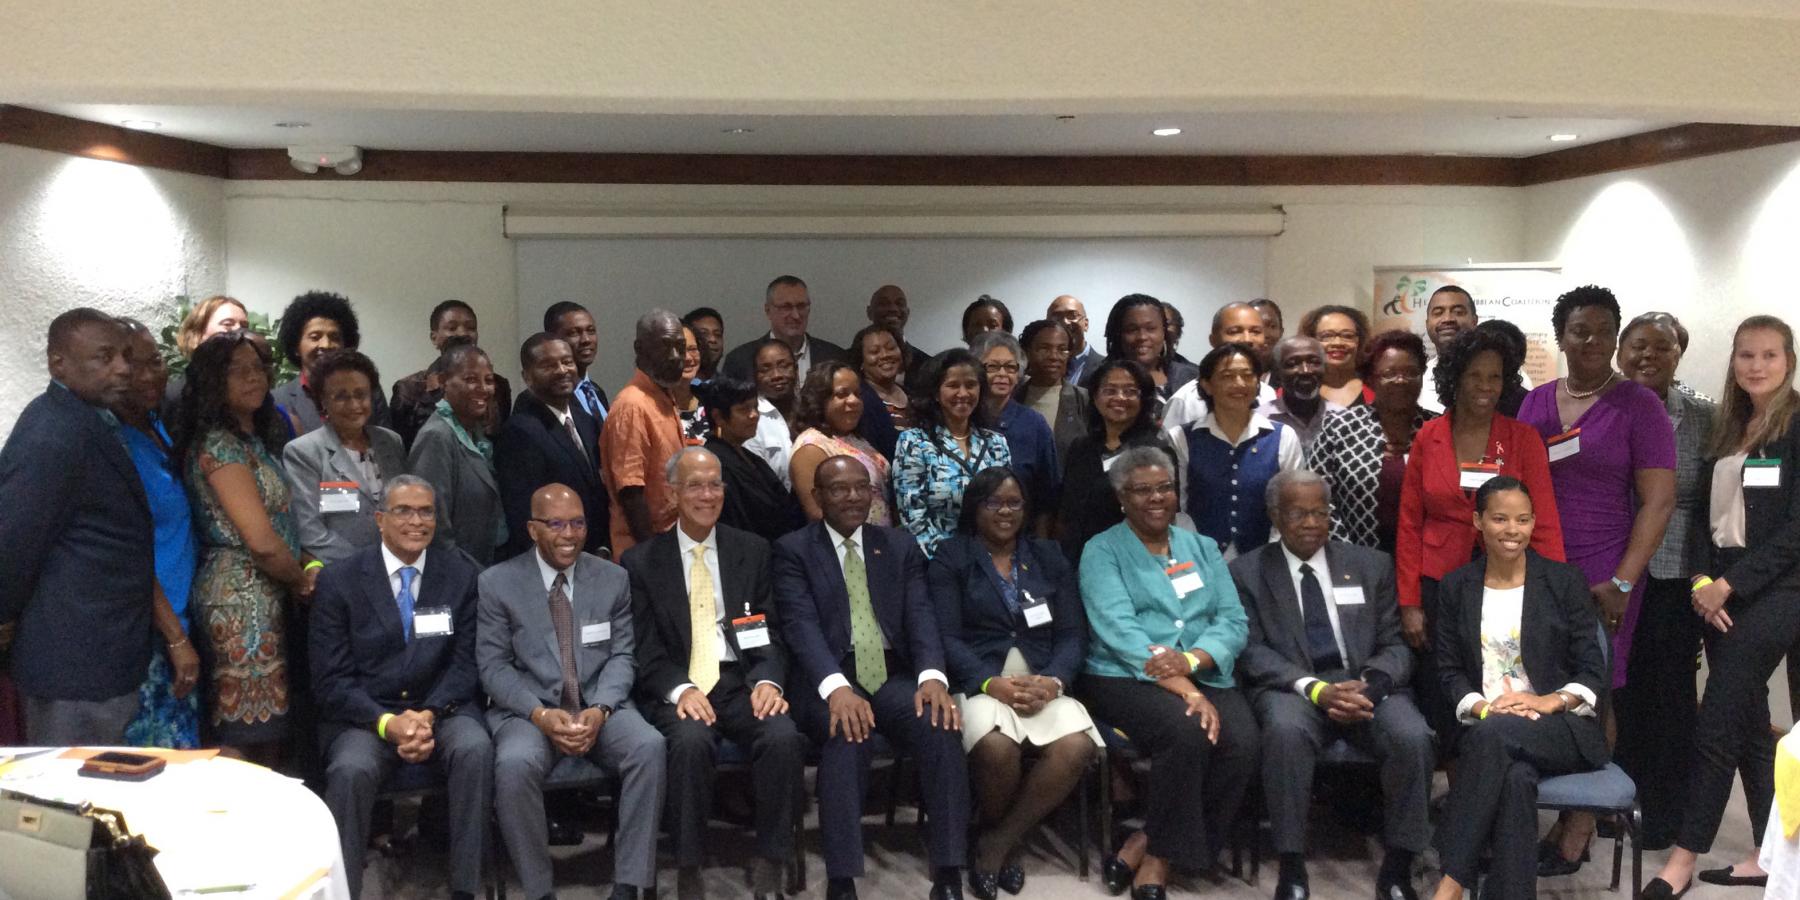 NCD Advocacy, Accountability and Conflict of Interest meeting hosted by the Healthy Caribbean Coalition in partnership with the Antigua & Barbuda Ministry of Health and the Environment (Antigua, Feb 2017) 